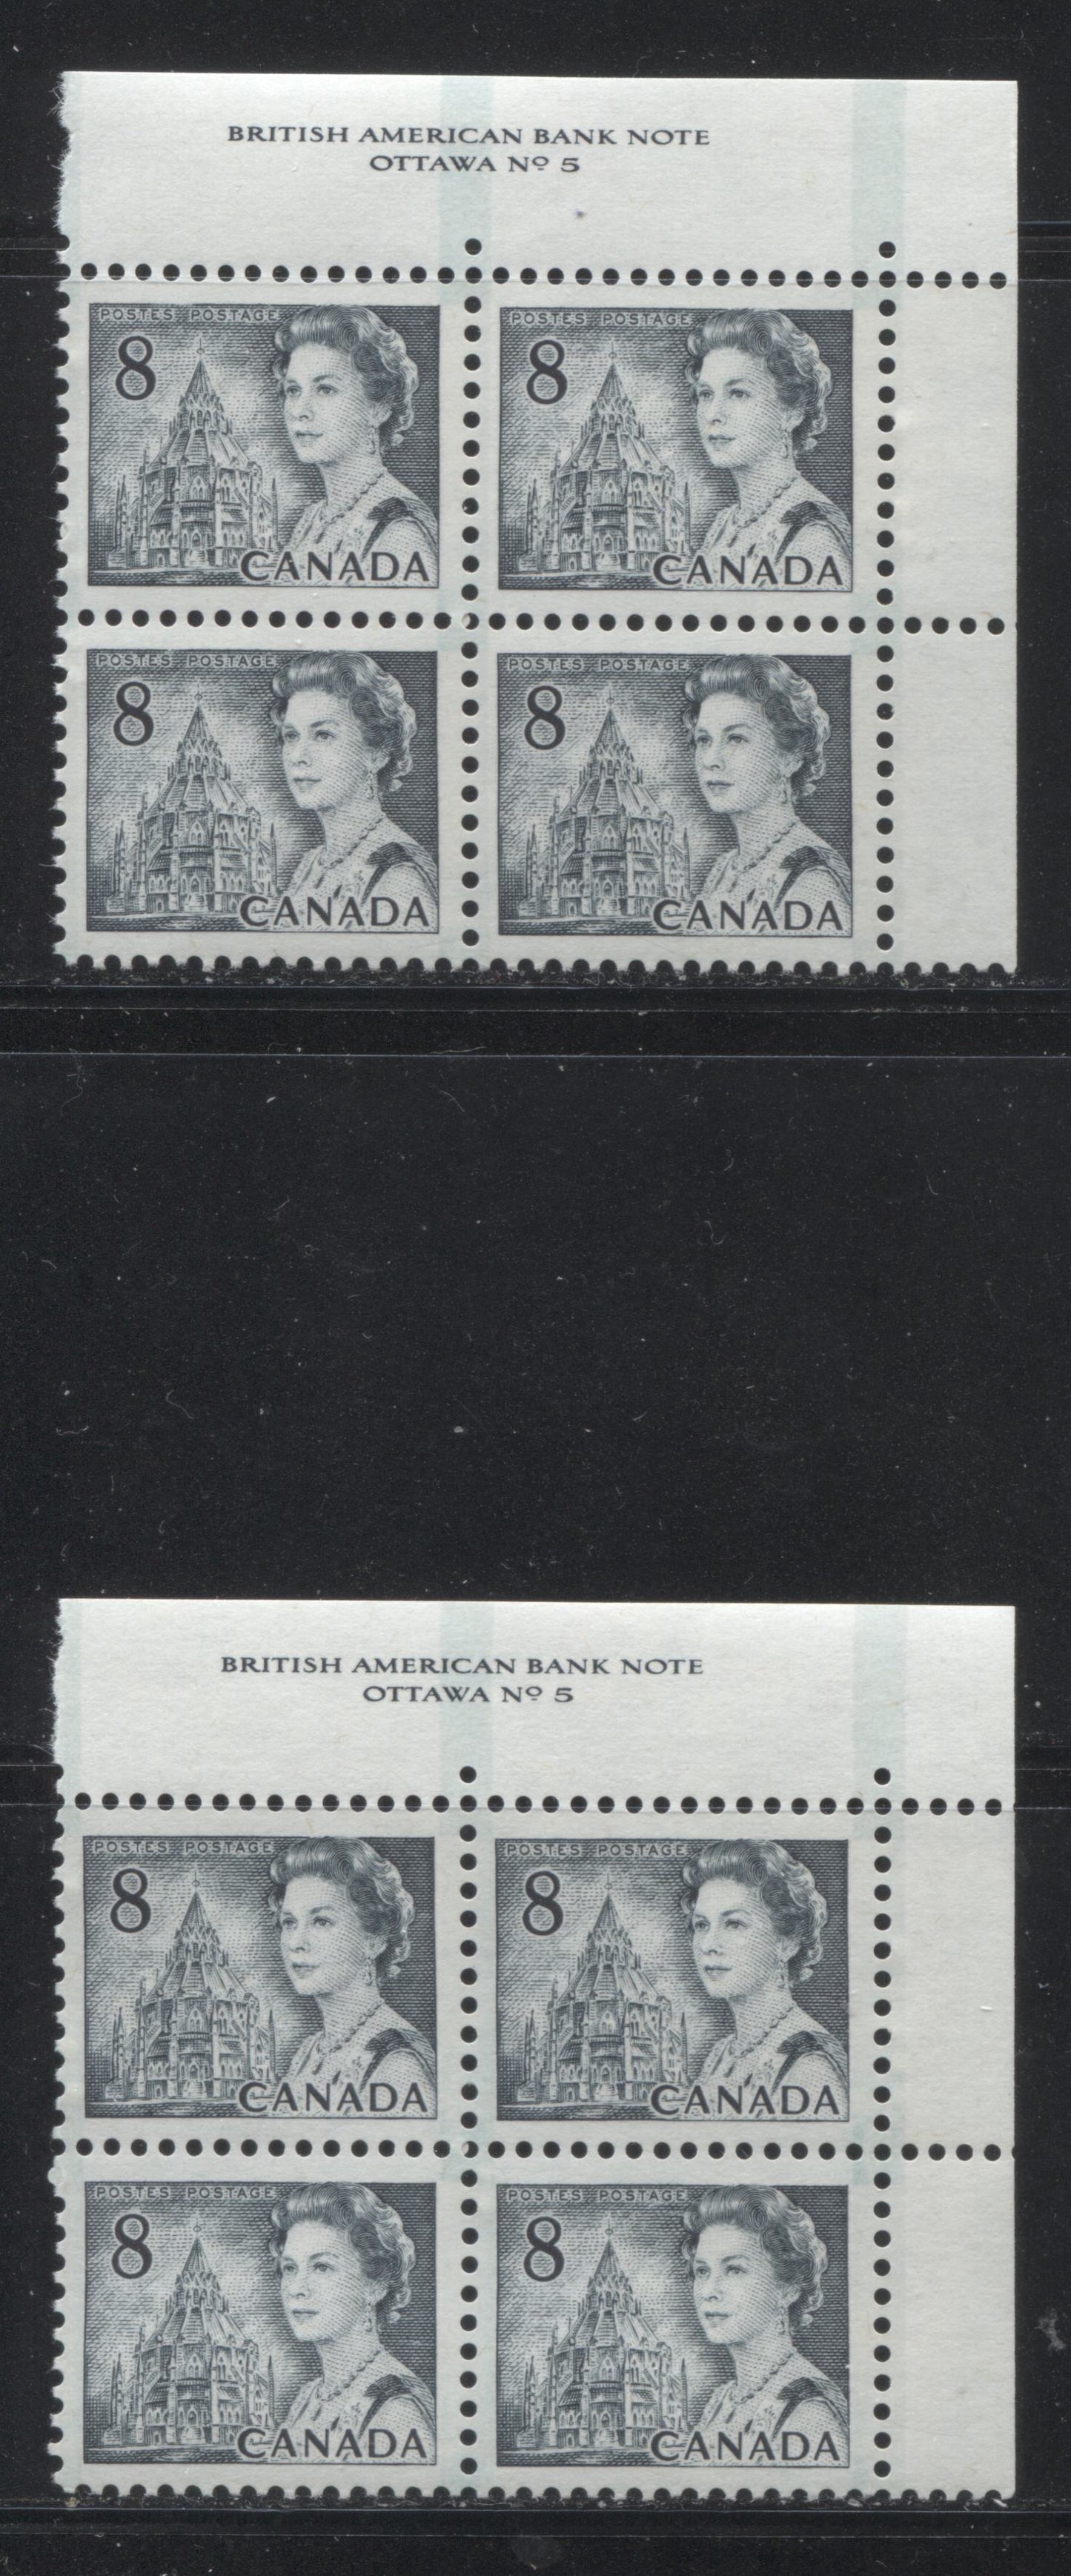 Lot 142 Canada #544pv 8c Slate Queen Elizabeth II, 1967-1973 Centennial Issue, Two VFNH UR GT2 Tagged Plate 5 Blocks Of 4 On LF-fl Bluish White & Grayish White Smooth Papers With PVA Gums